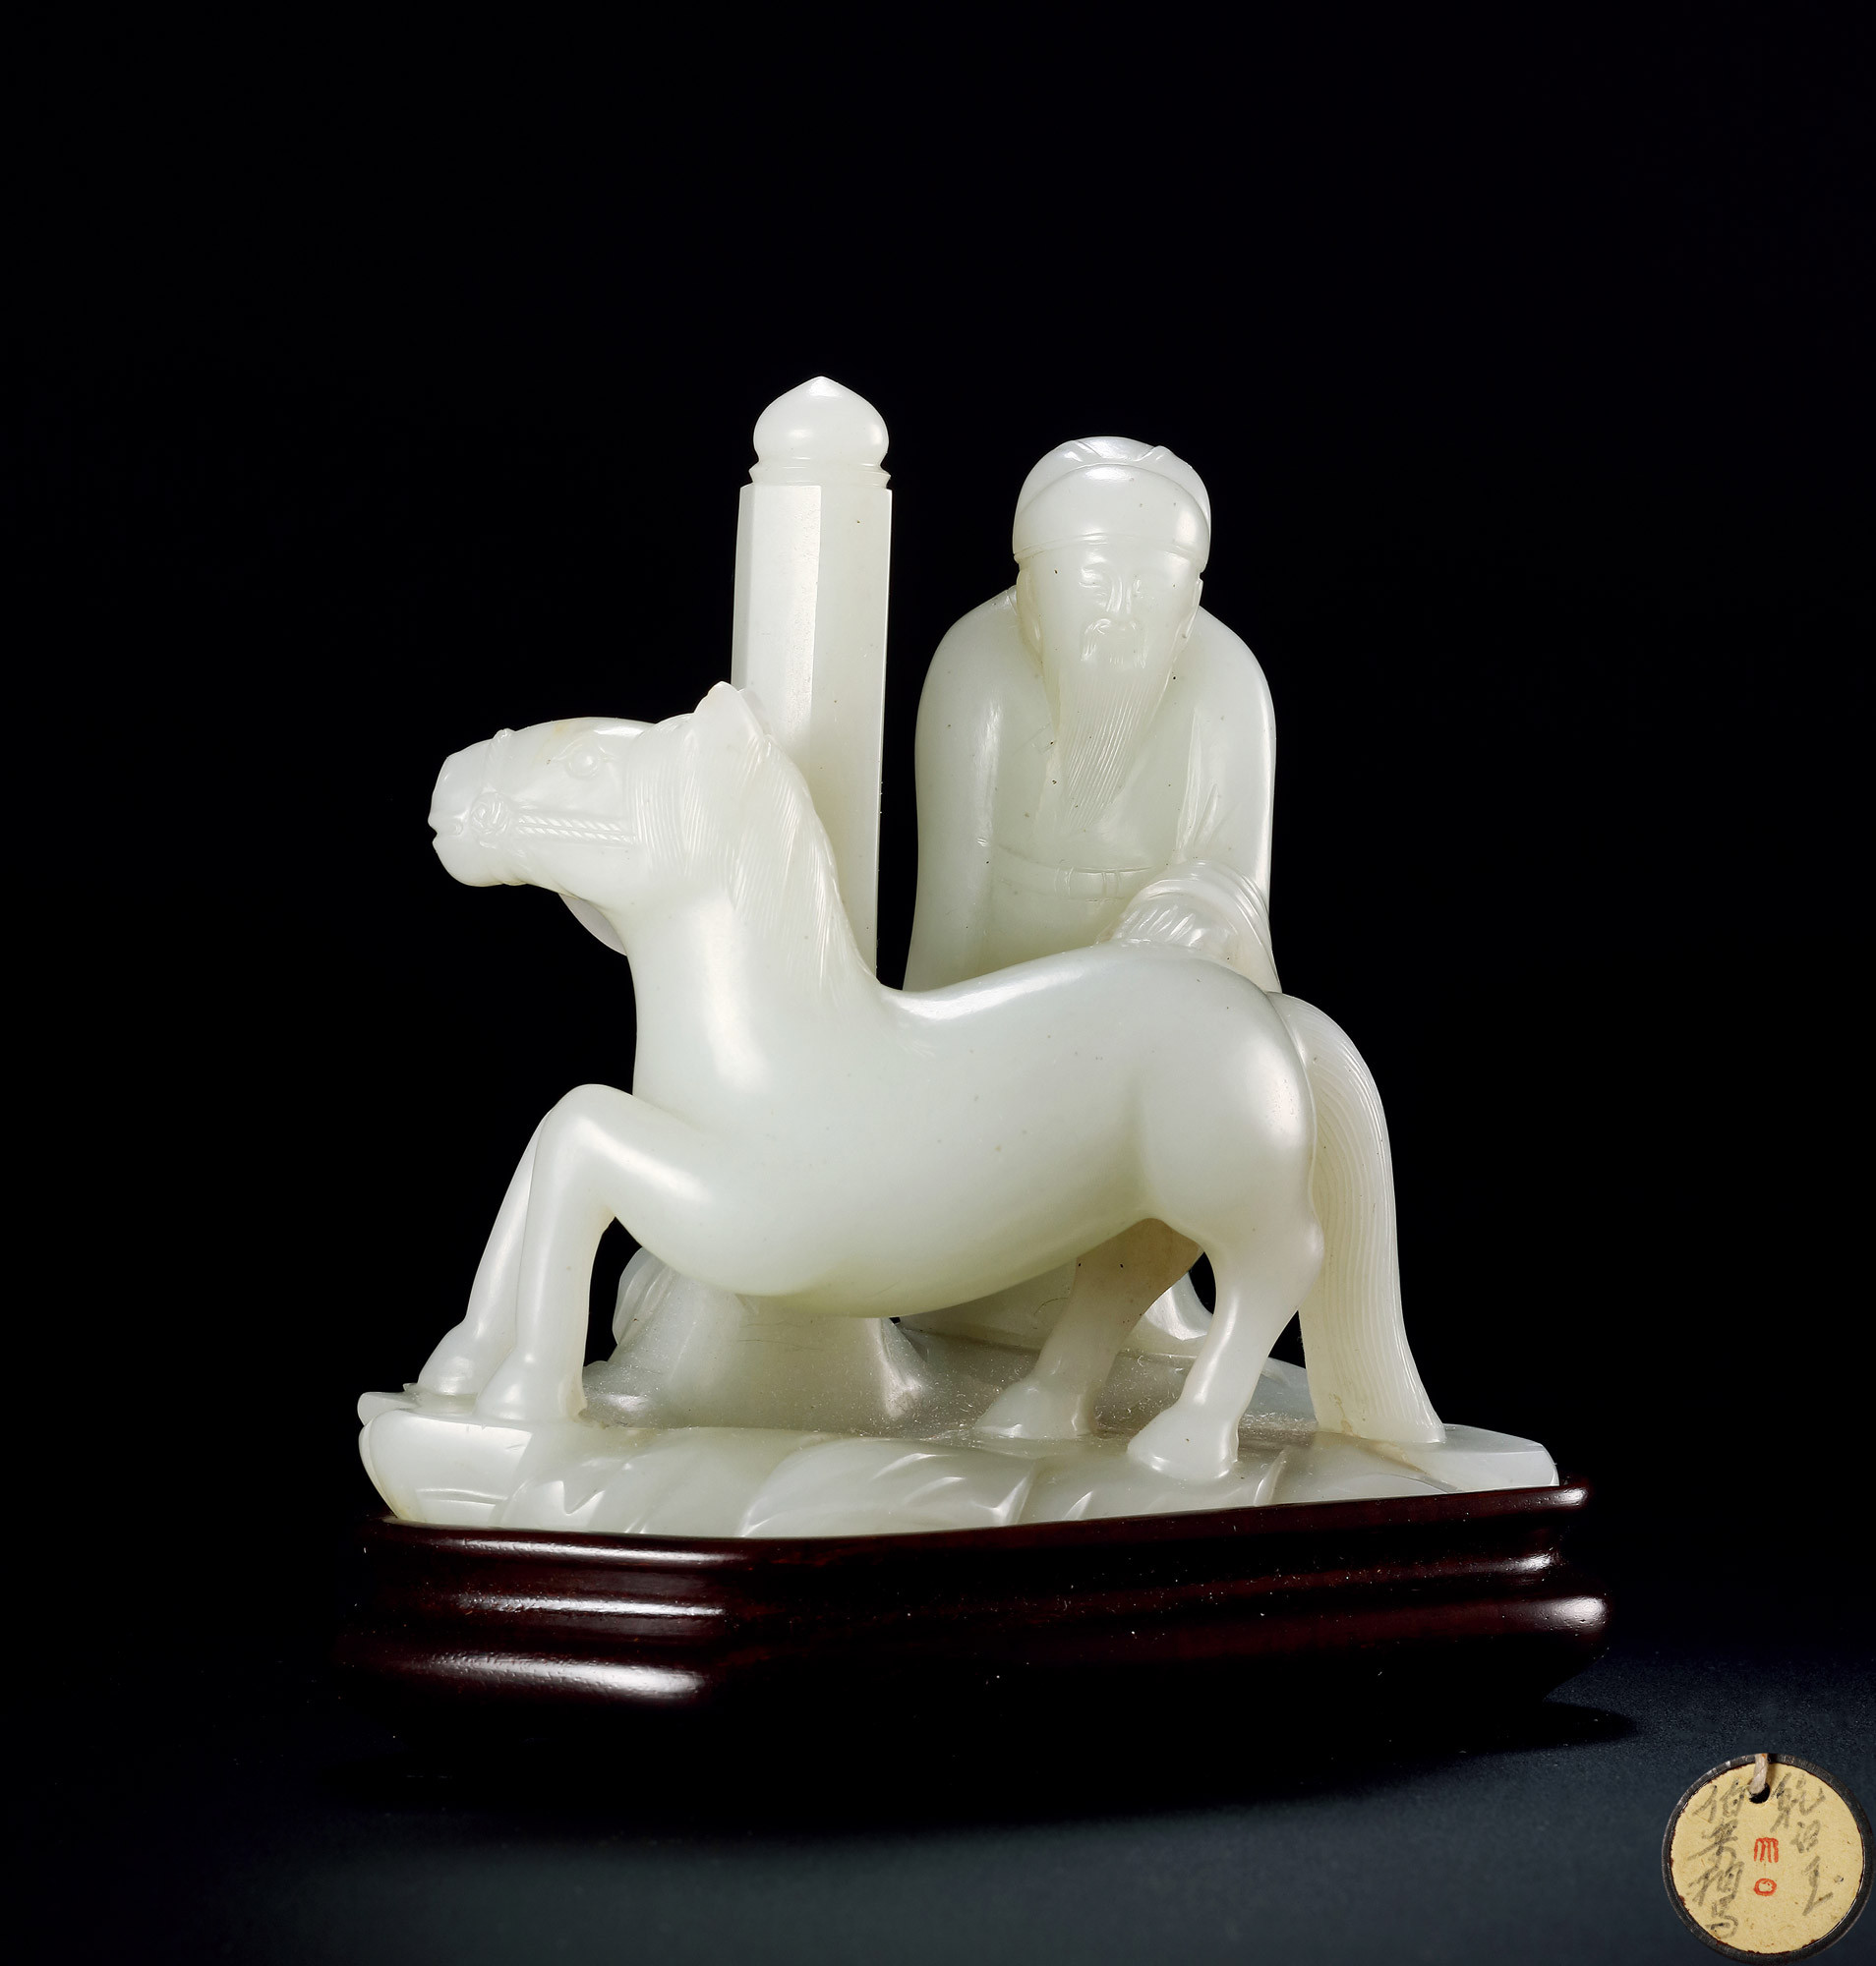 A CARVED WHITE JADE FIGURE AND HORSE ORNAMENT